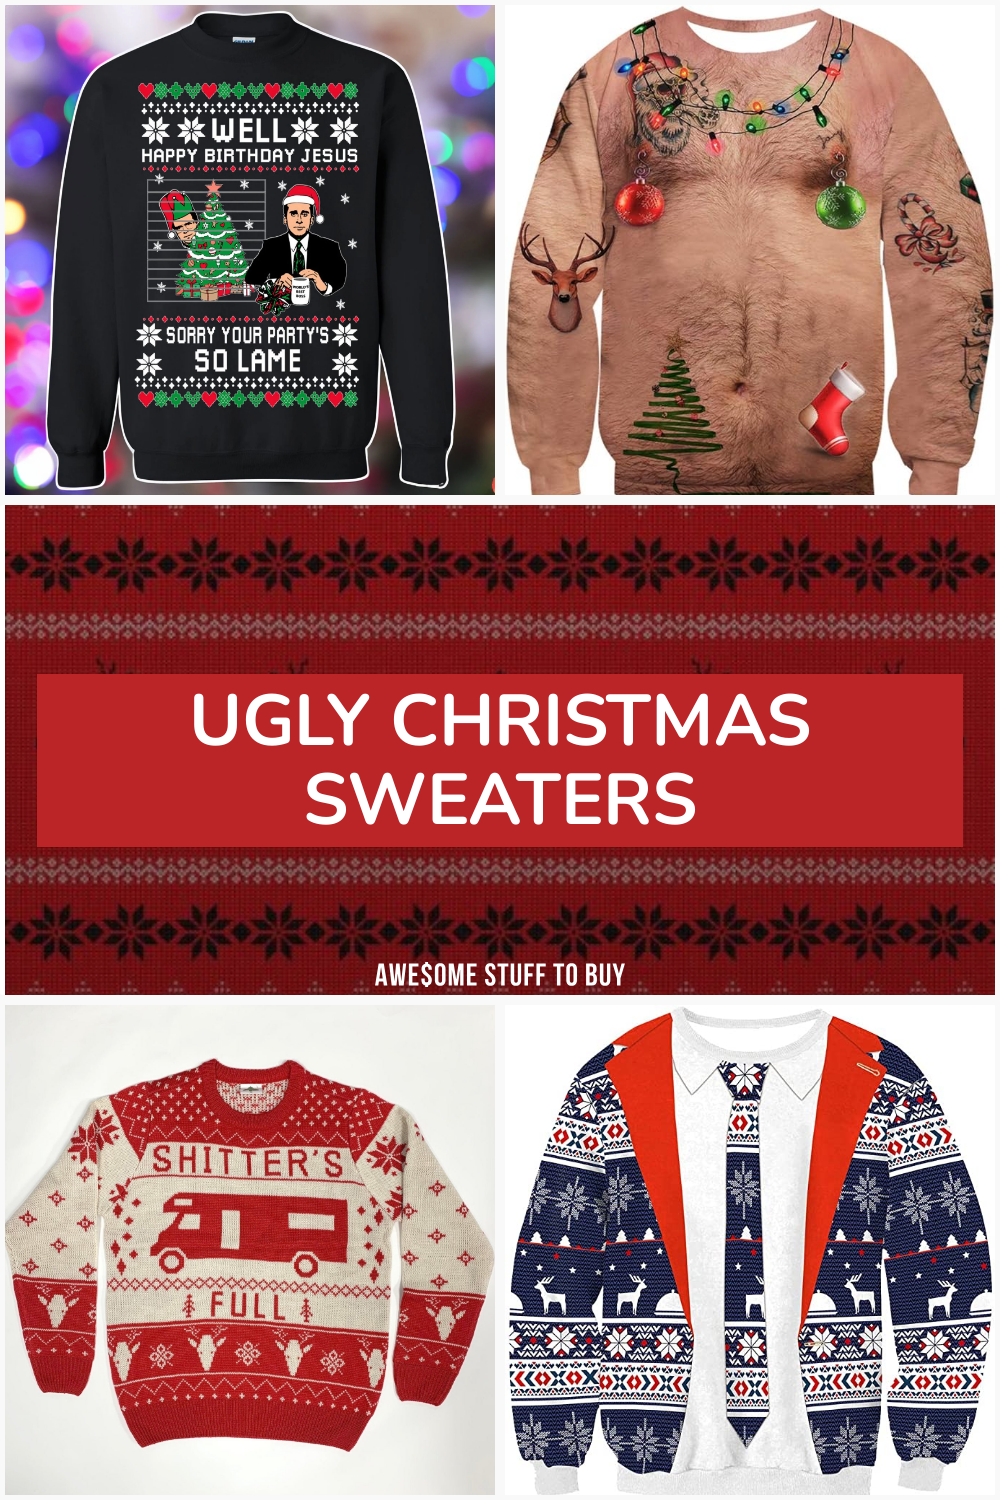 Ugly Christmas Sweaters // Awesome Stuff to Buy